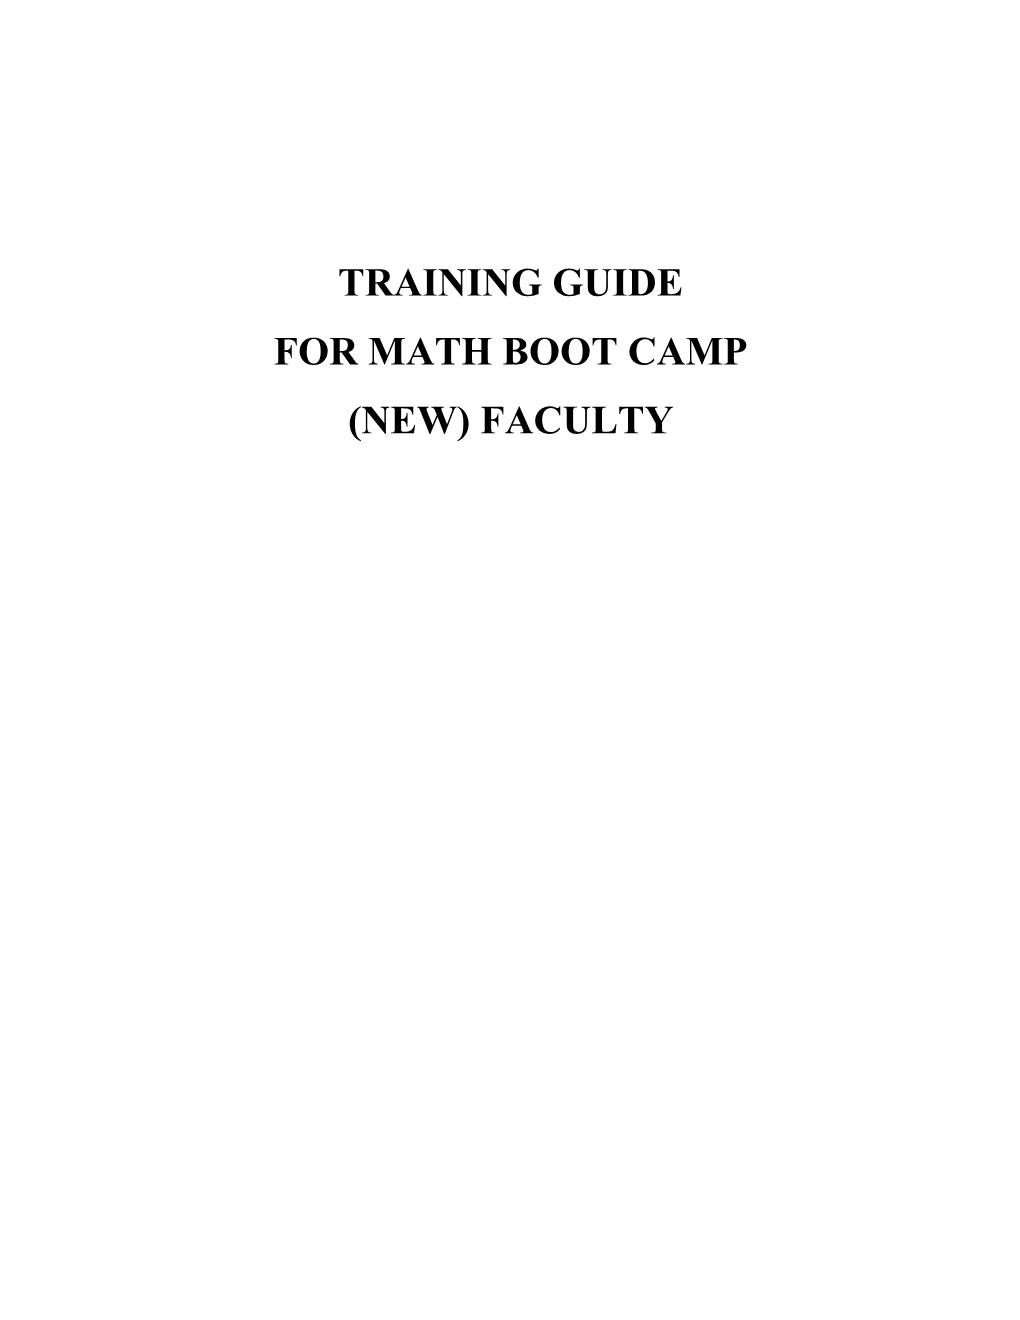 For Math Boot Camp